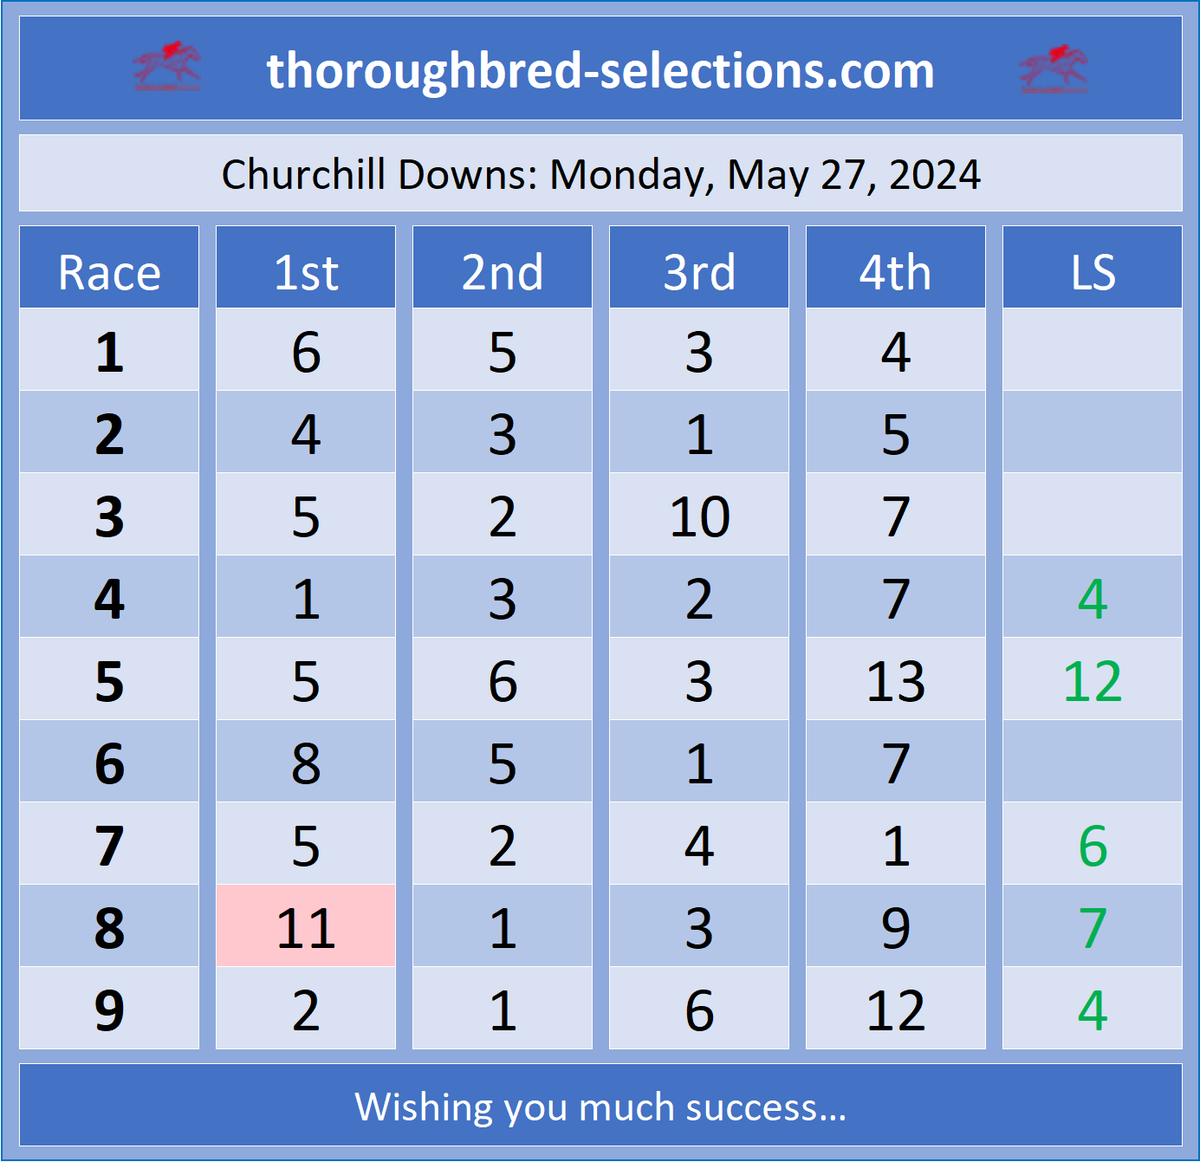 Monday, 05-27-2024:        
Today we remember and honor those who made the ultimate sacrifice for the freedoms we enjoy today. #Veterans #MemorialDay.
Selections from @ChurchillDowns
Full PDF selections at thoroughbred-selections.com #HorseRacingTips #HorseRacing